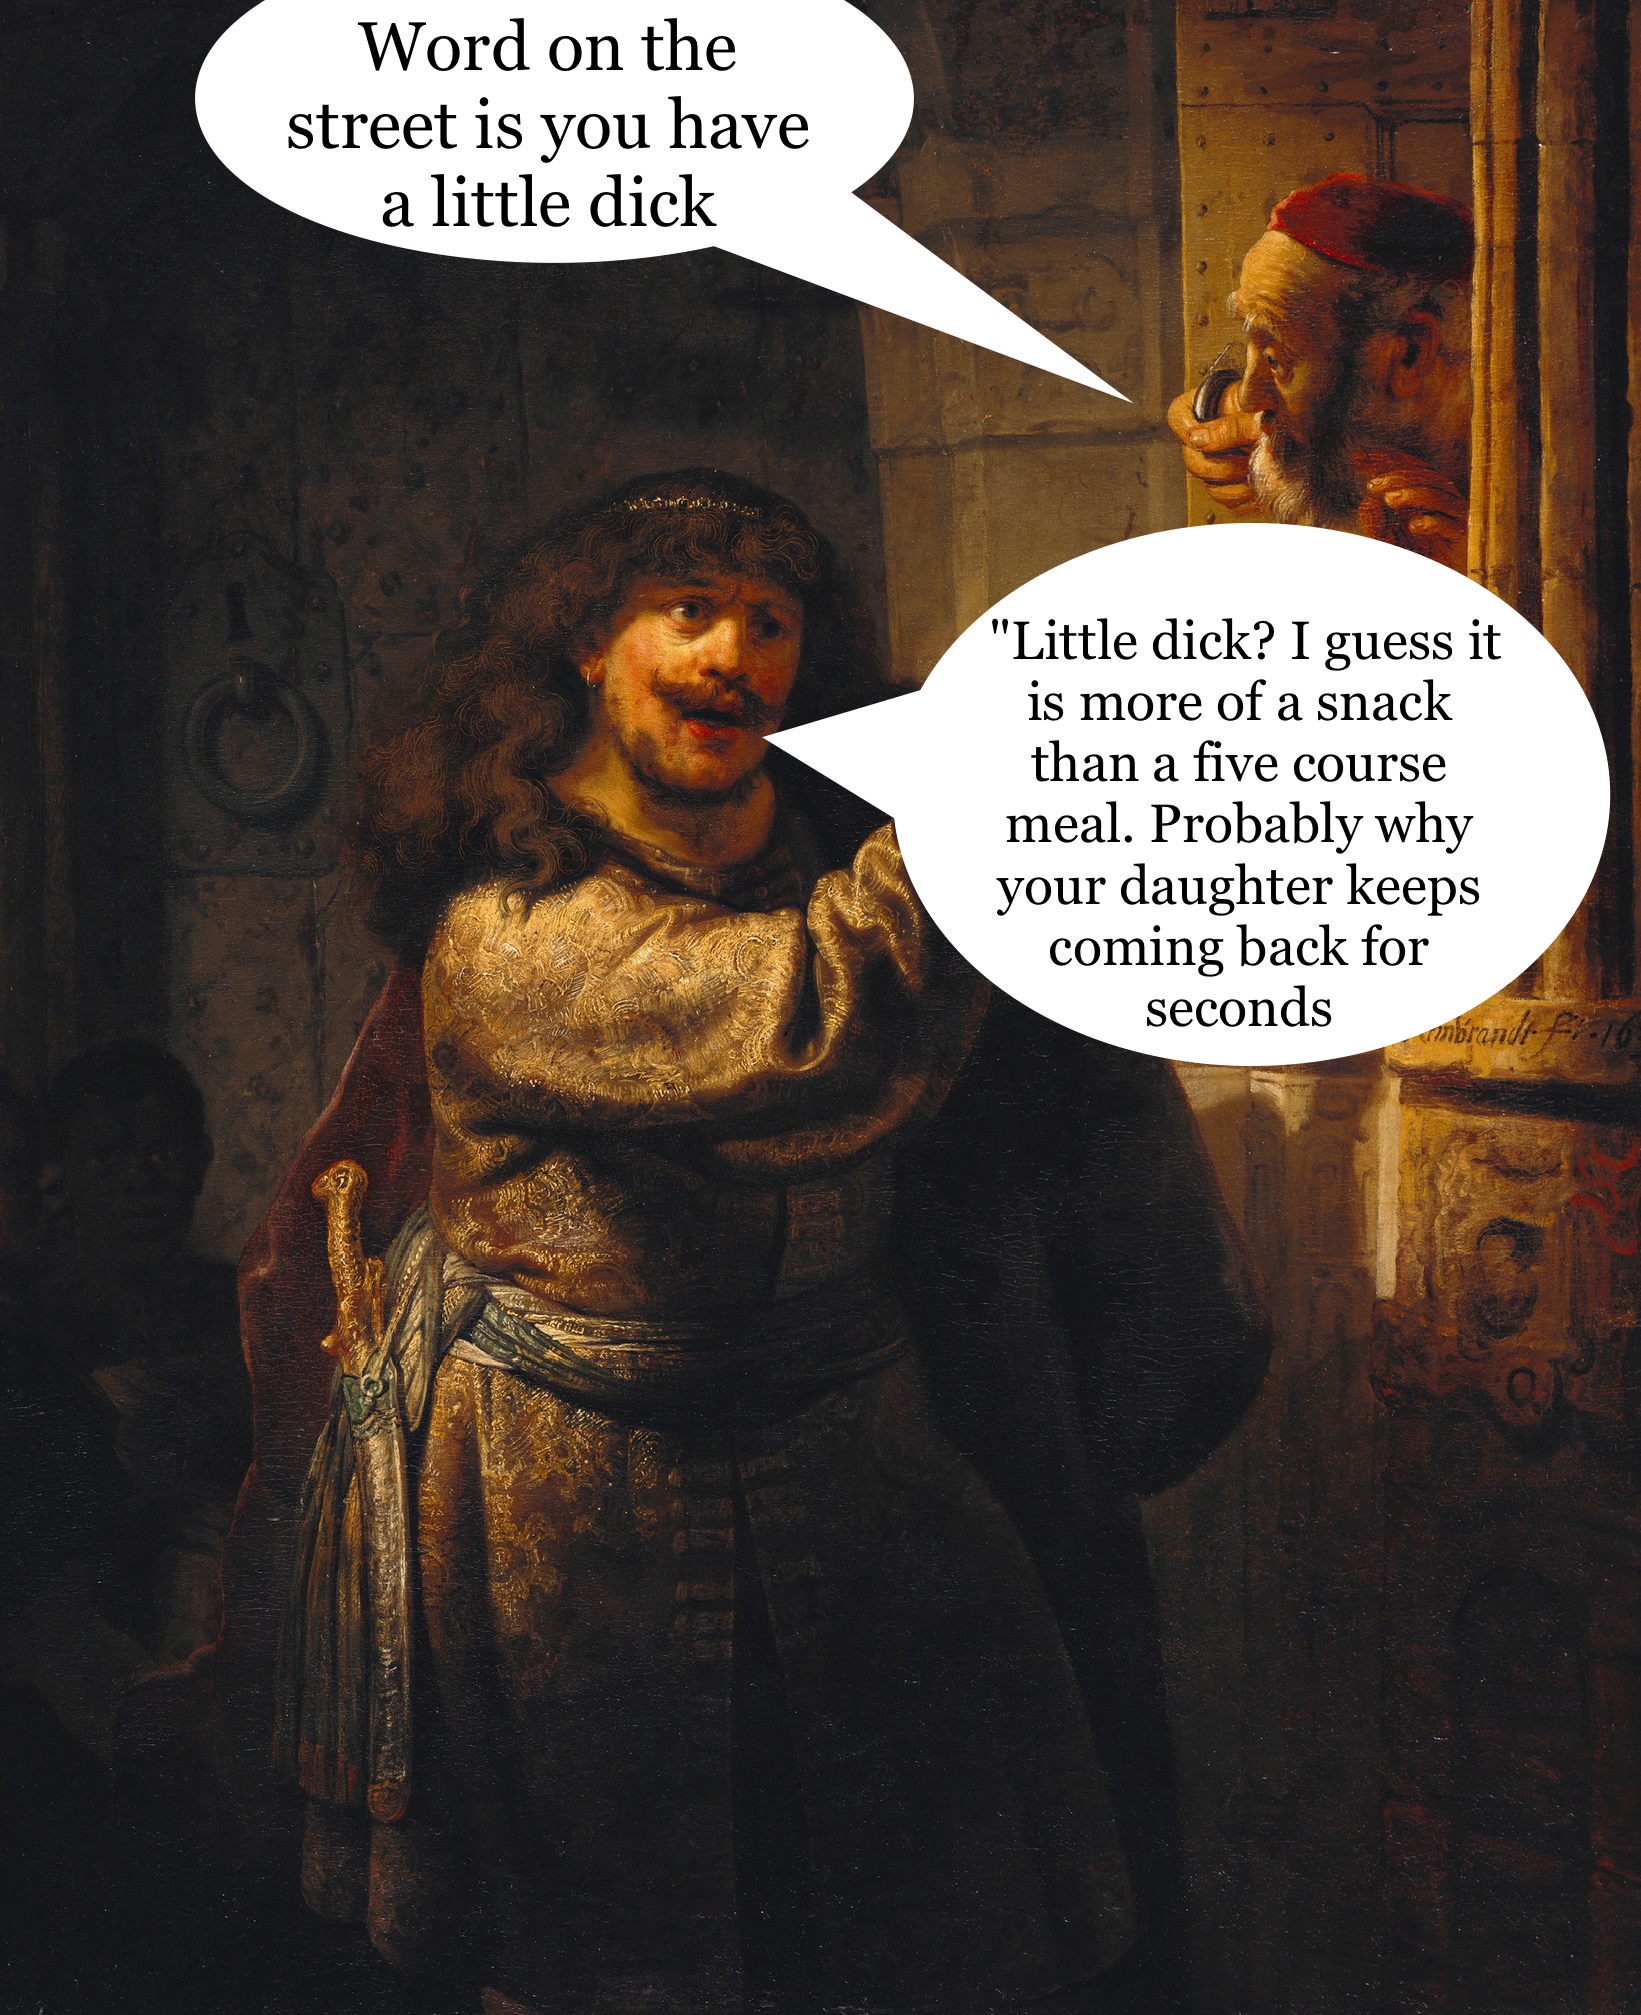 rembrandt samson threatening his father in law - Word on the street is you have a little dick